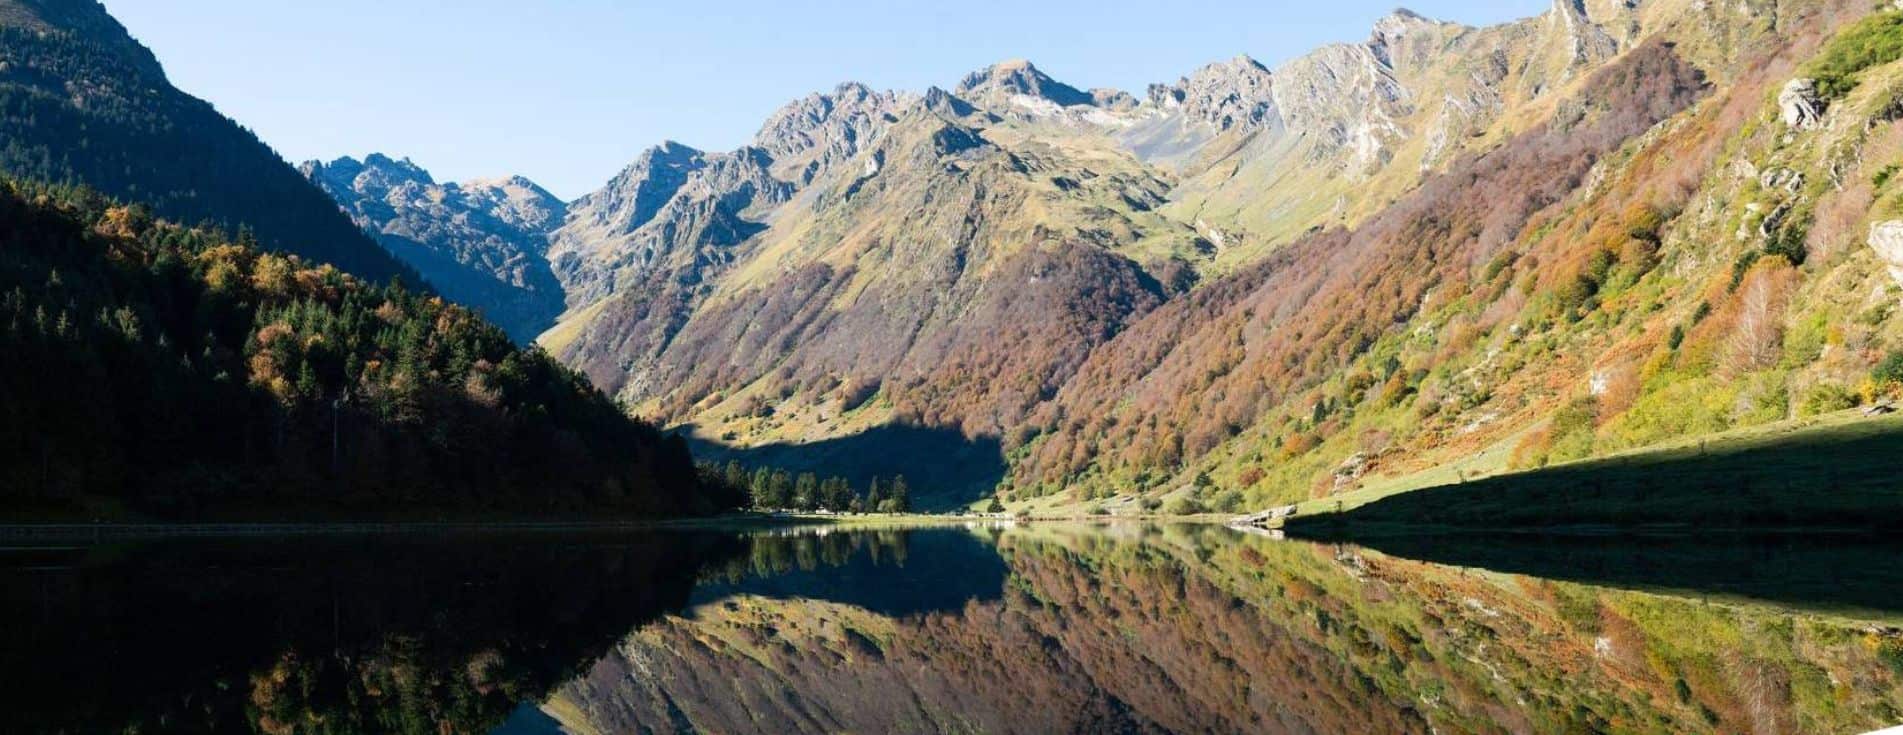 lac-estaing-pyrenees